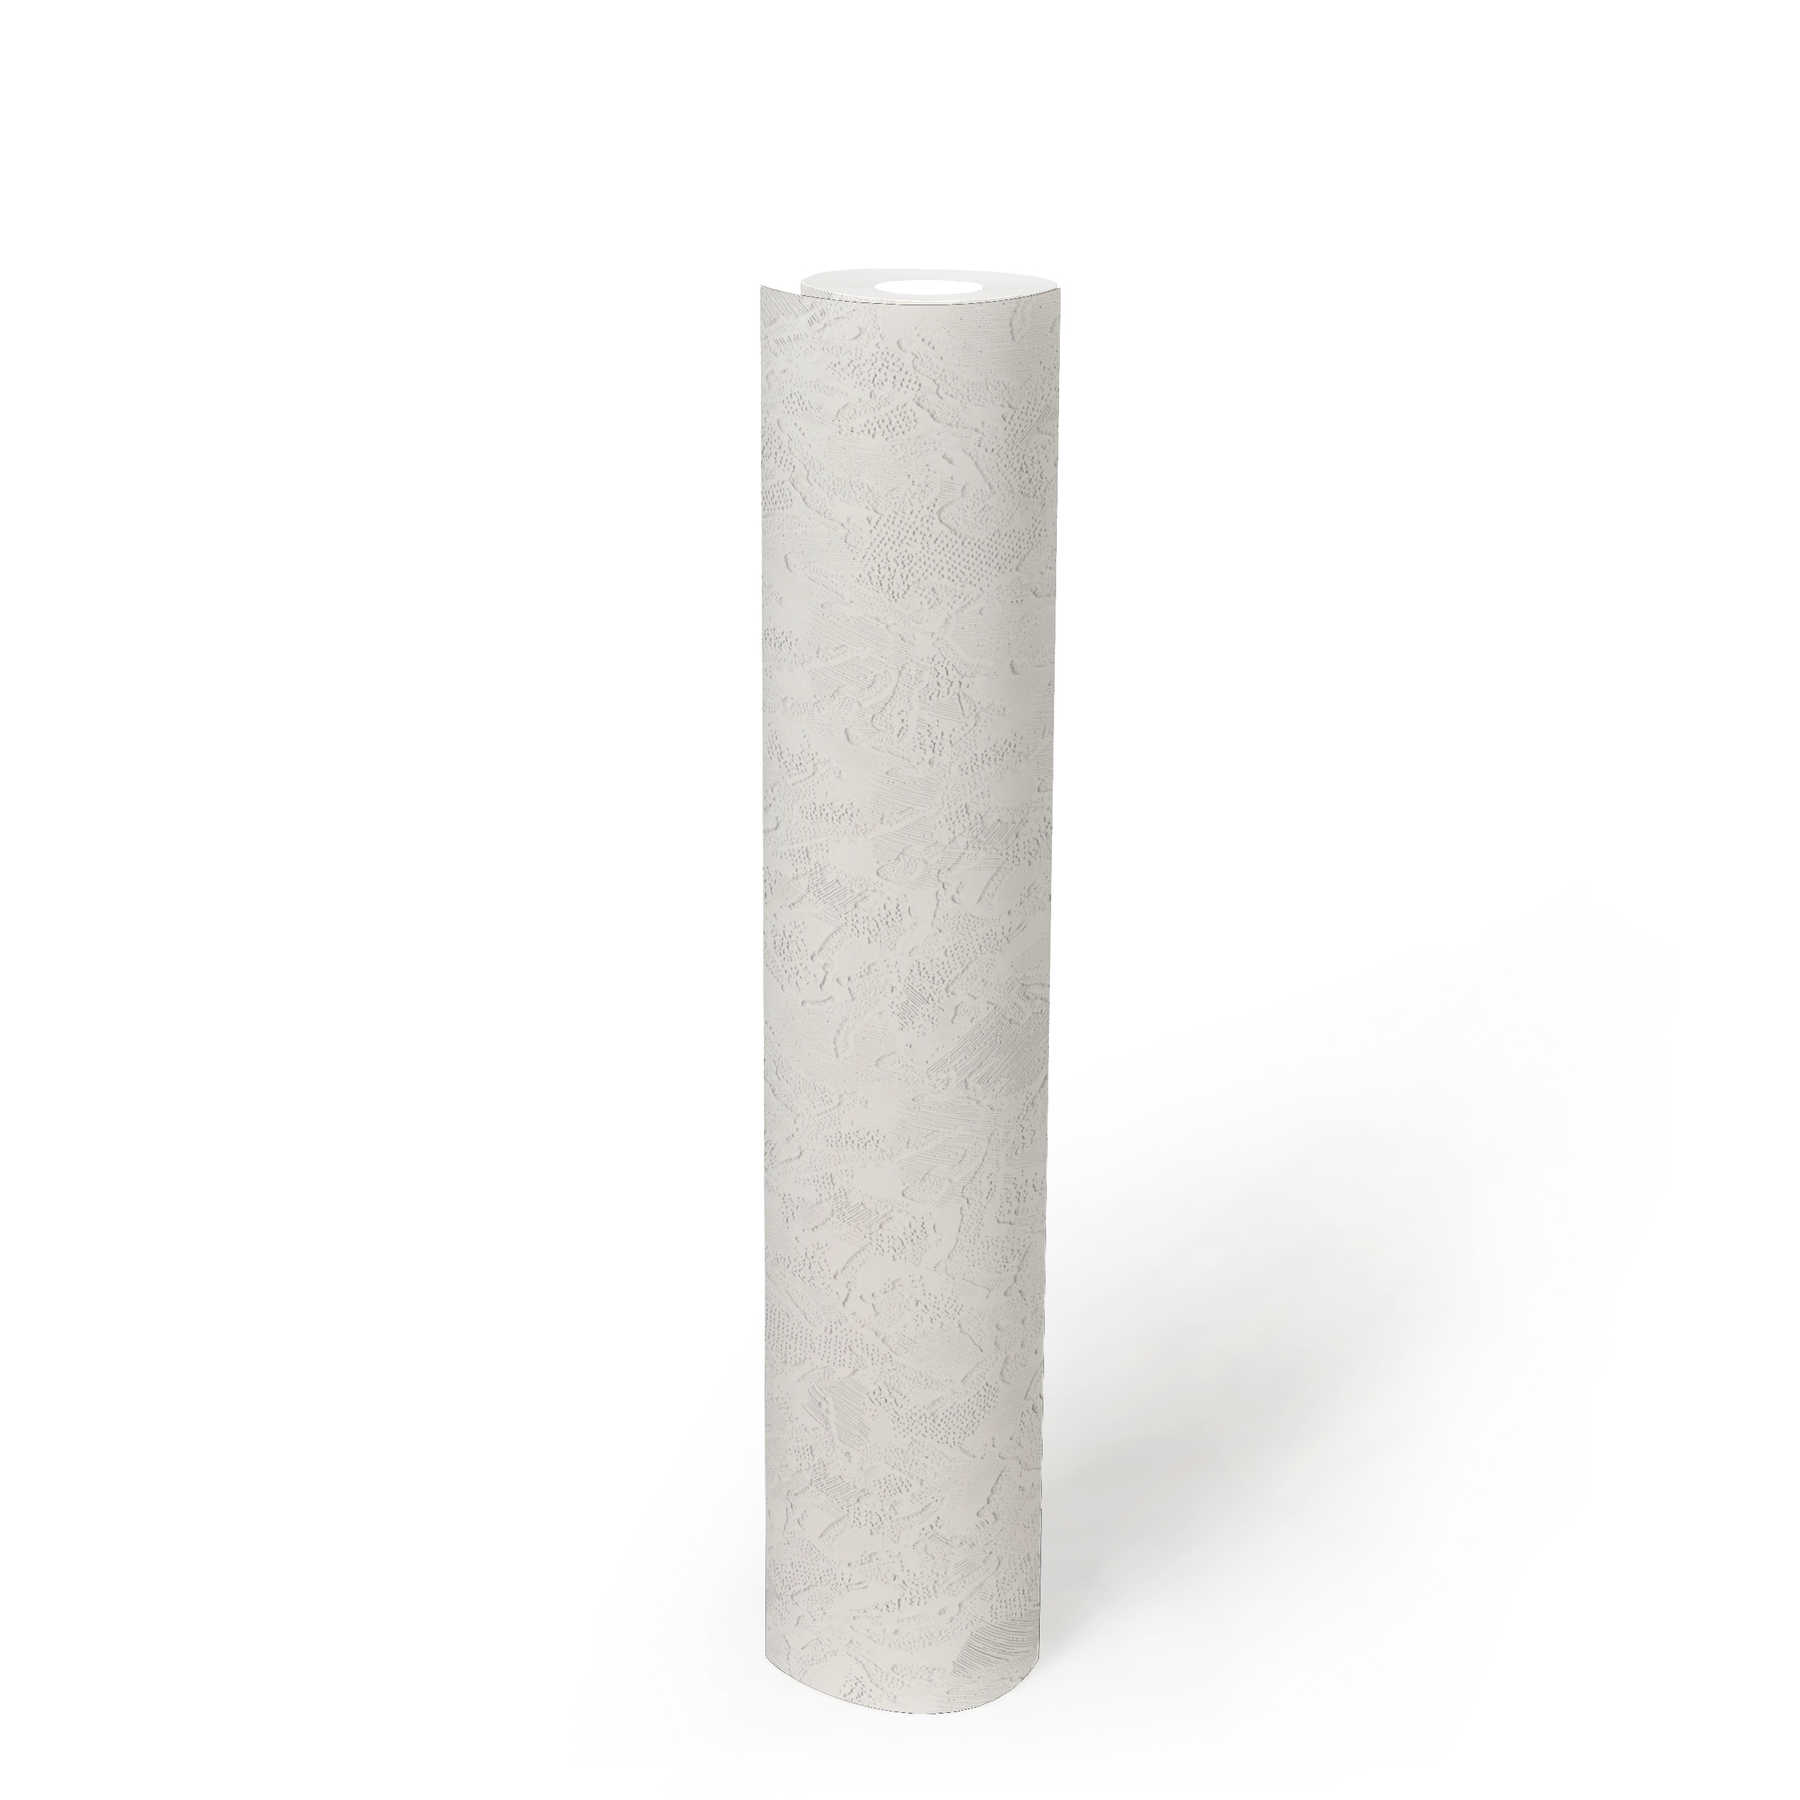             Plaster look wallpaper with deceptive textured surface - white
        